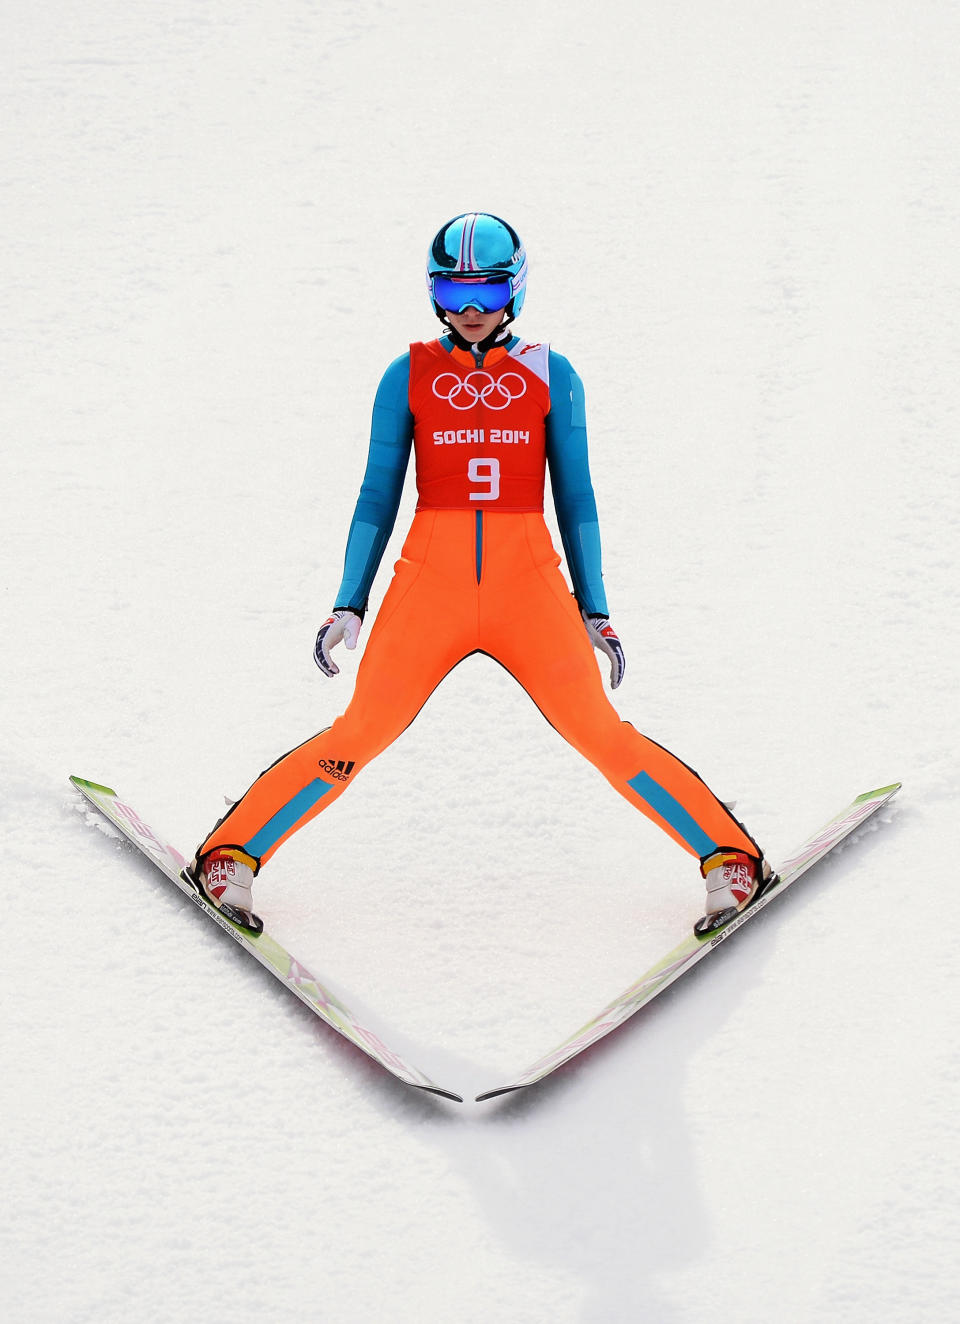 Spela Rogelj of Slovenia lands her jump during the Ladies' Normal Hill Individual Ski Jumping training on day 2 of the Sochi 2014 Winter Olympics at the RusSki Gorki Ski Jumping Center on February 9, 2014 in Sochi, Russia.